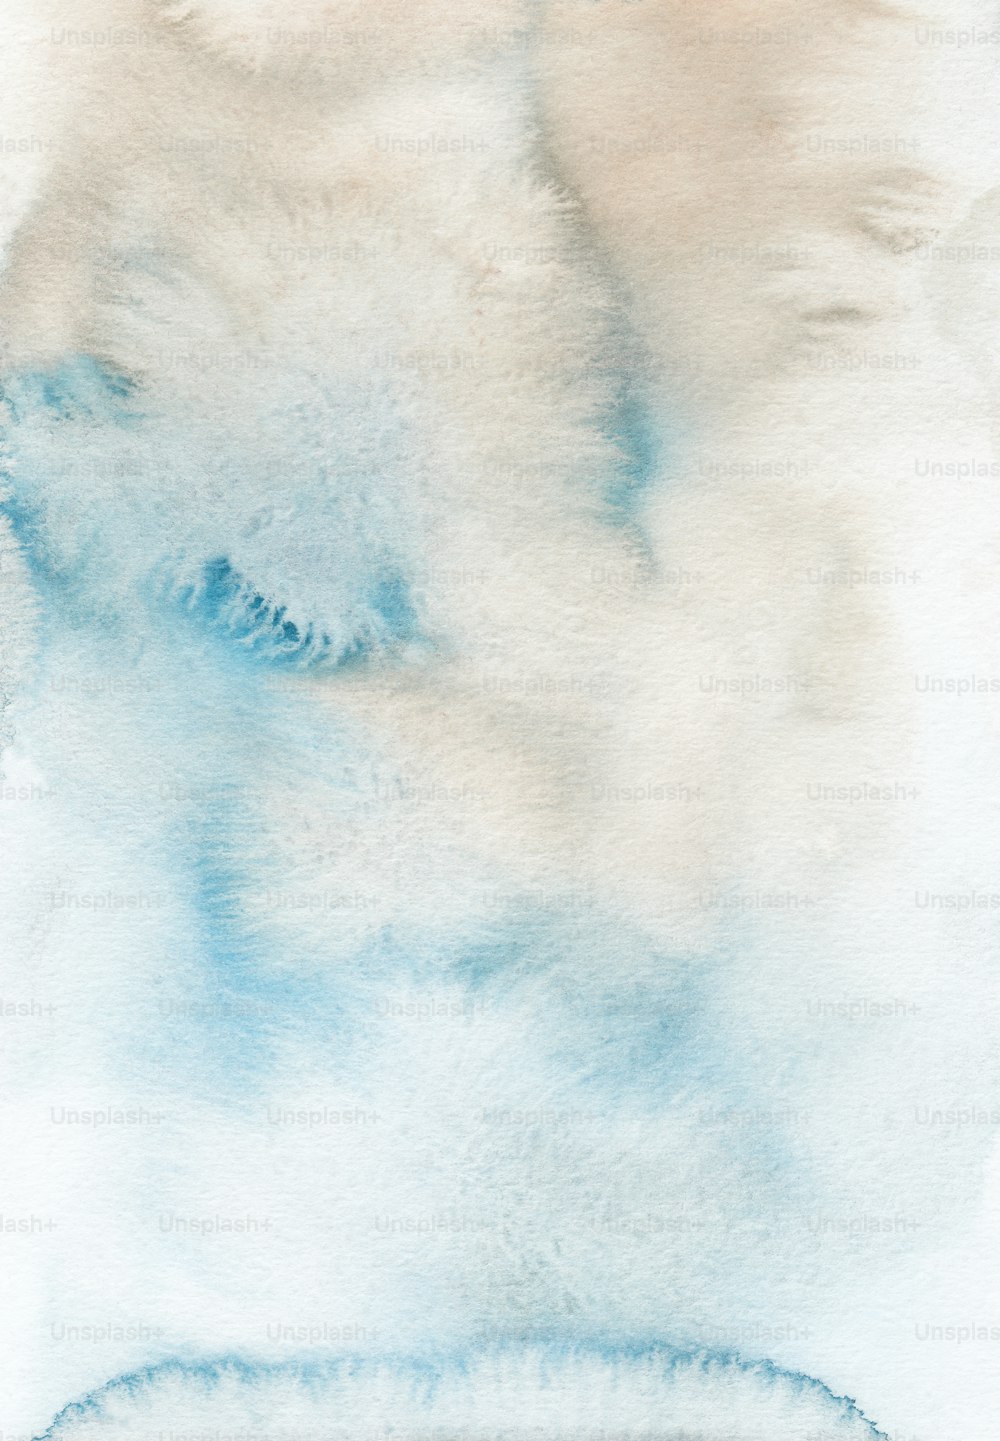 a watercolor painting of a white bear's head